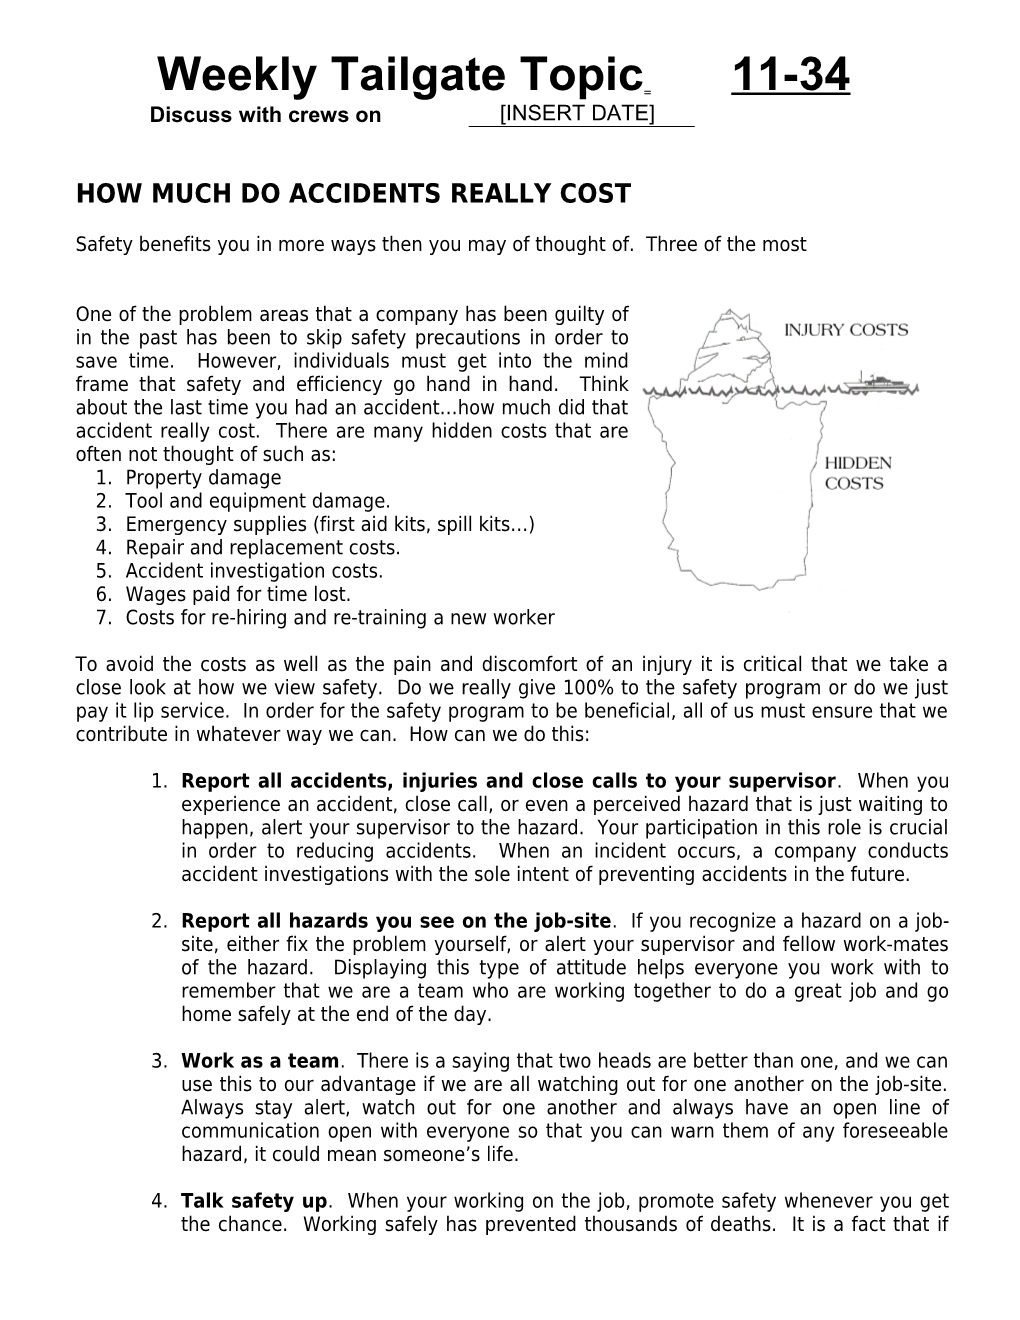 How Much Do Accidents Really Cost